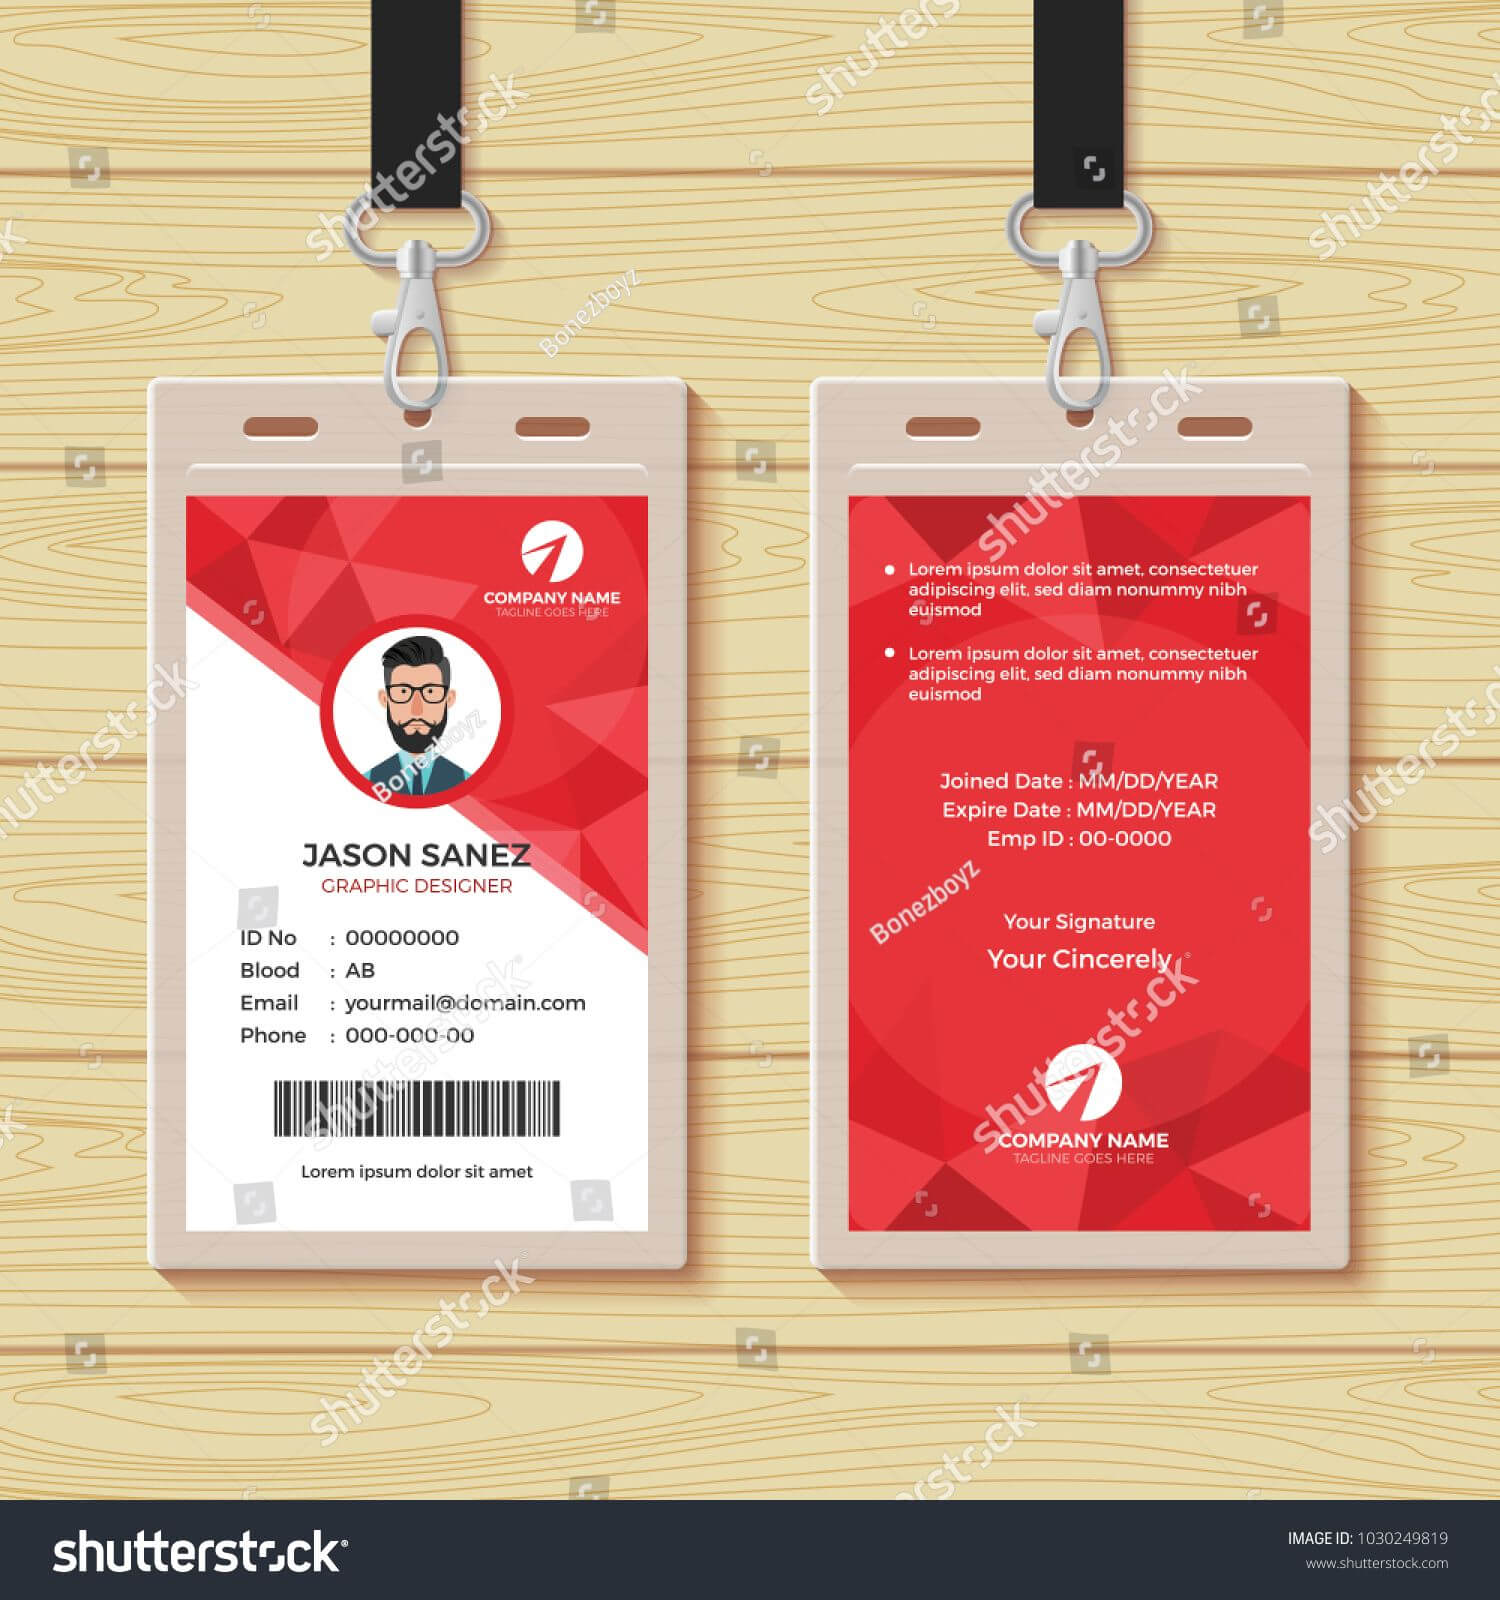 This Id Card Template Perfect For Any Types Of Agency Inside Work Id Card Template